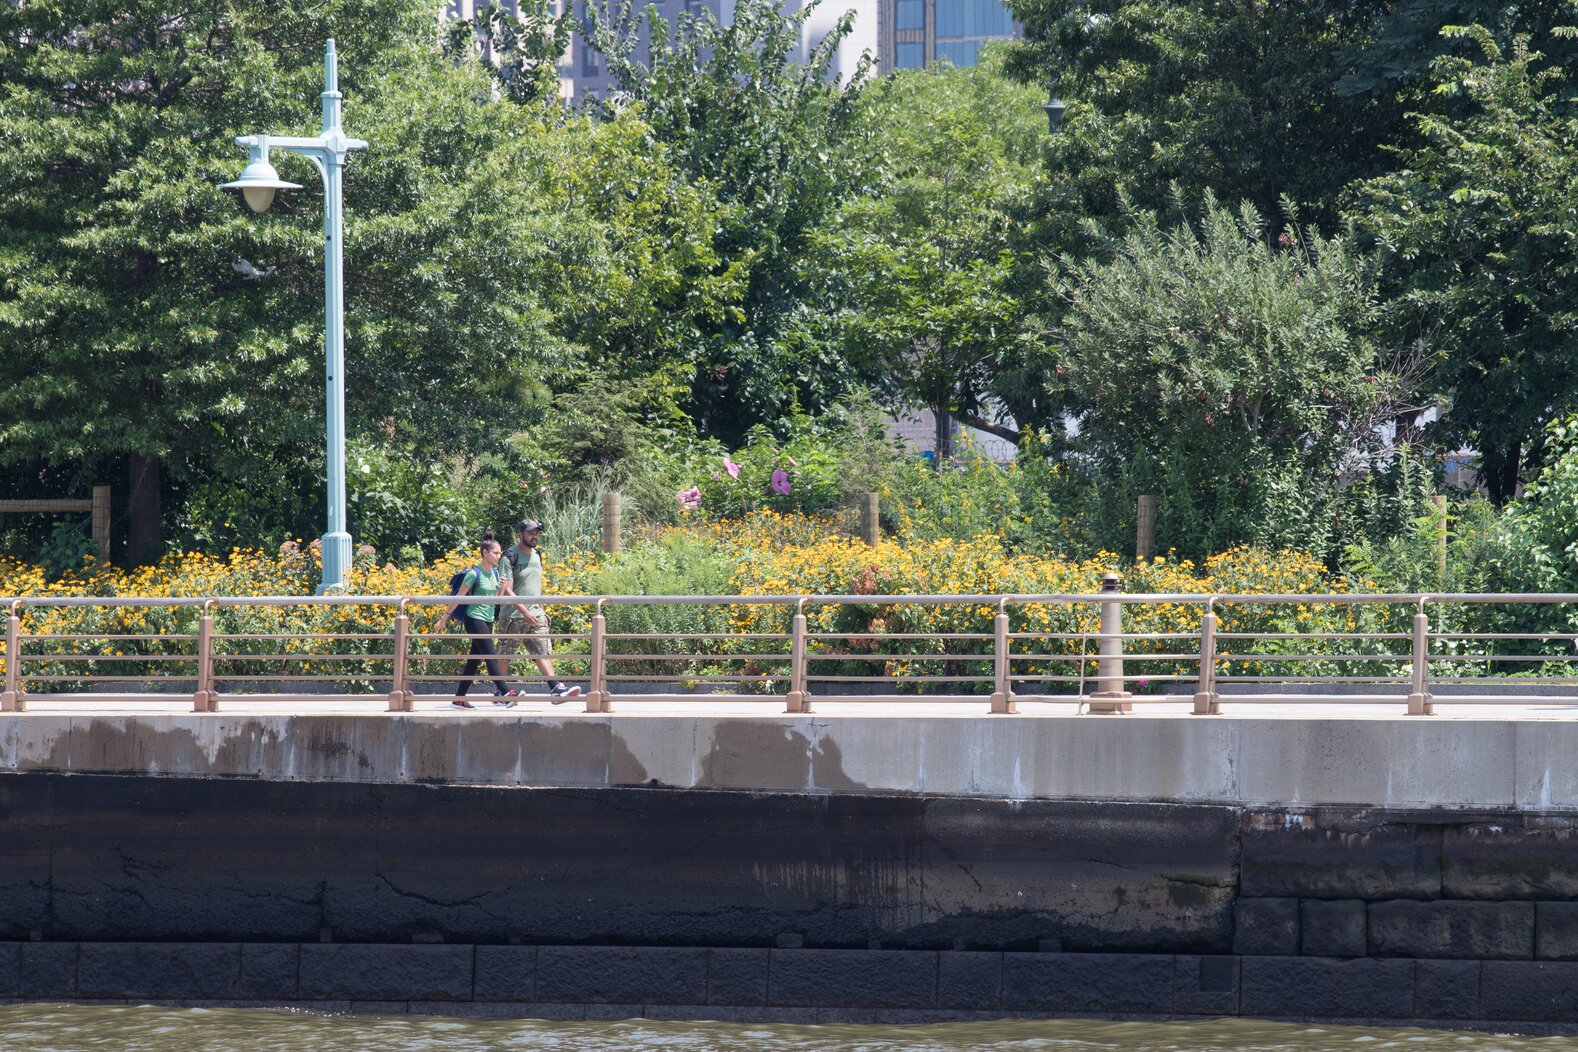 The Hudson River Park Habitat Garden, located along the Hudson River from West 26th to West 29th Streets, includes native plant species that support birds, pollinators, and other wildlife. Photo: Max Guliani for Hudson River Park